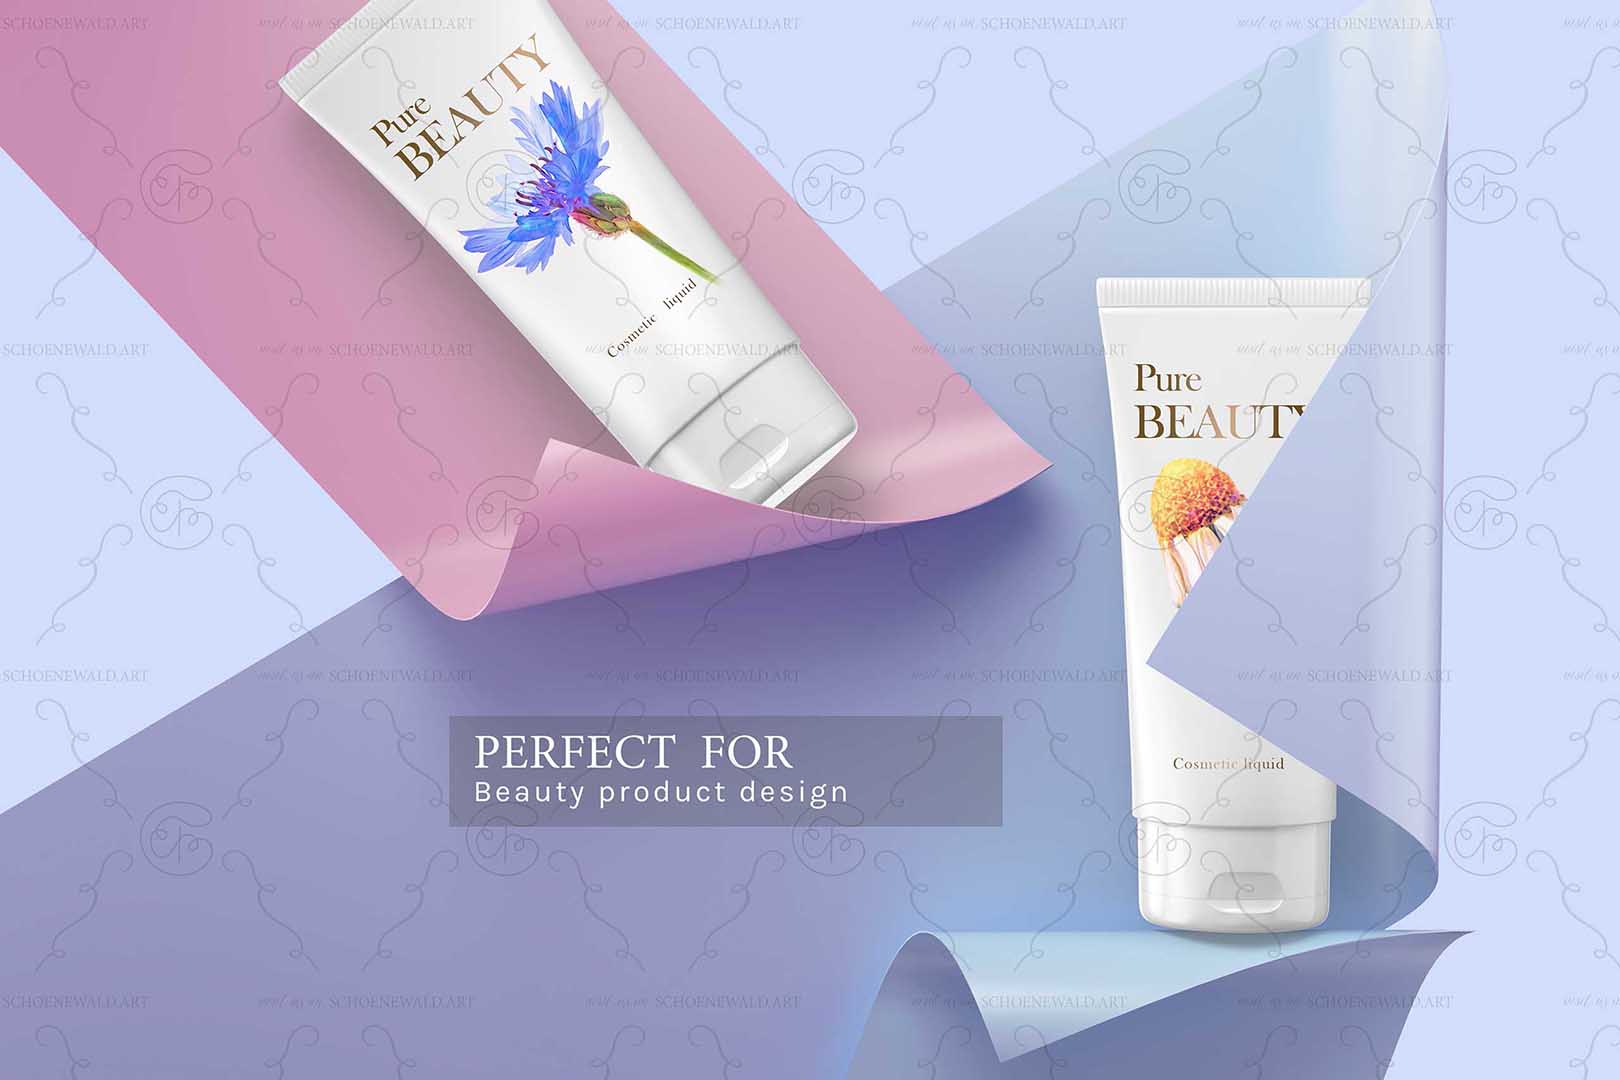 Cosmetic product design example with the graphics from "Meadow Magic" set by Schoenewald.art - unique watercolor paintings of meadow flowers